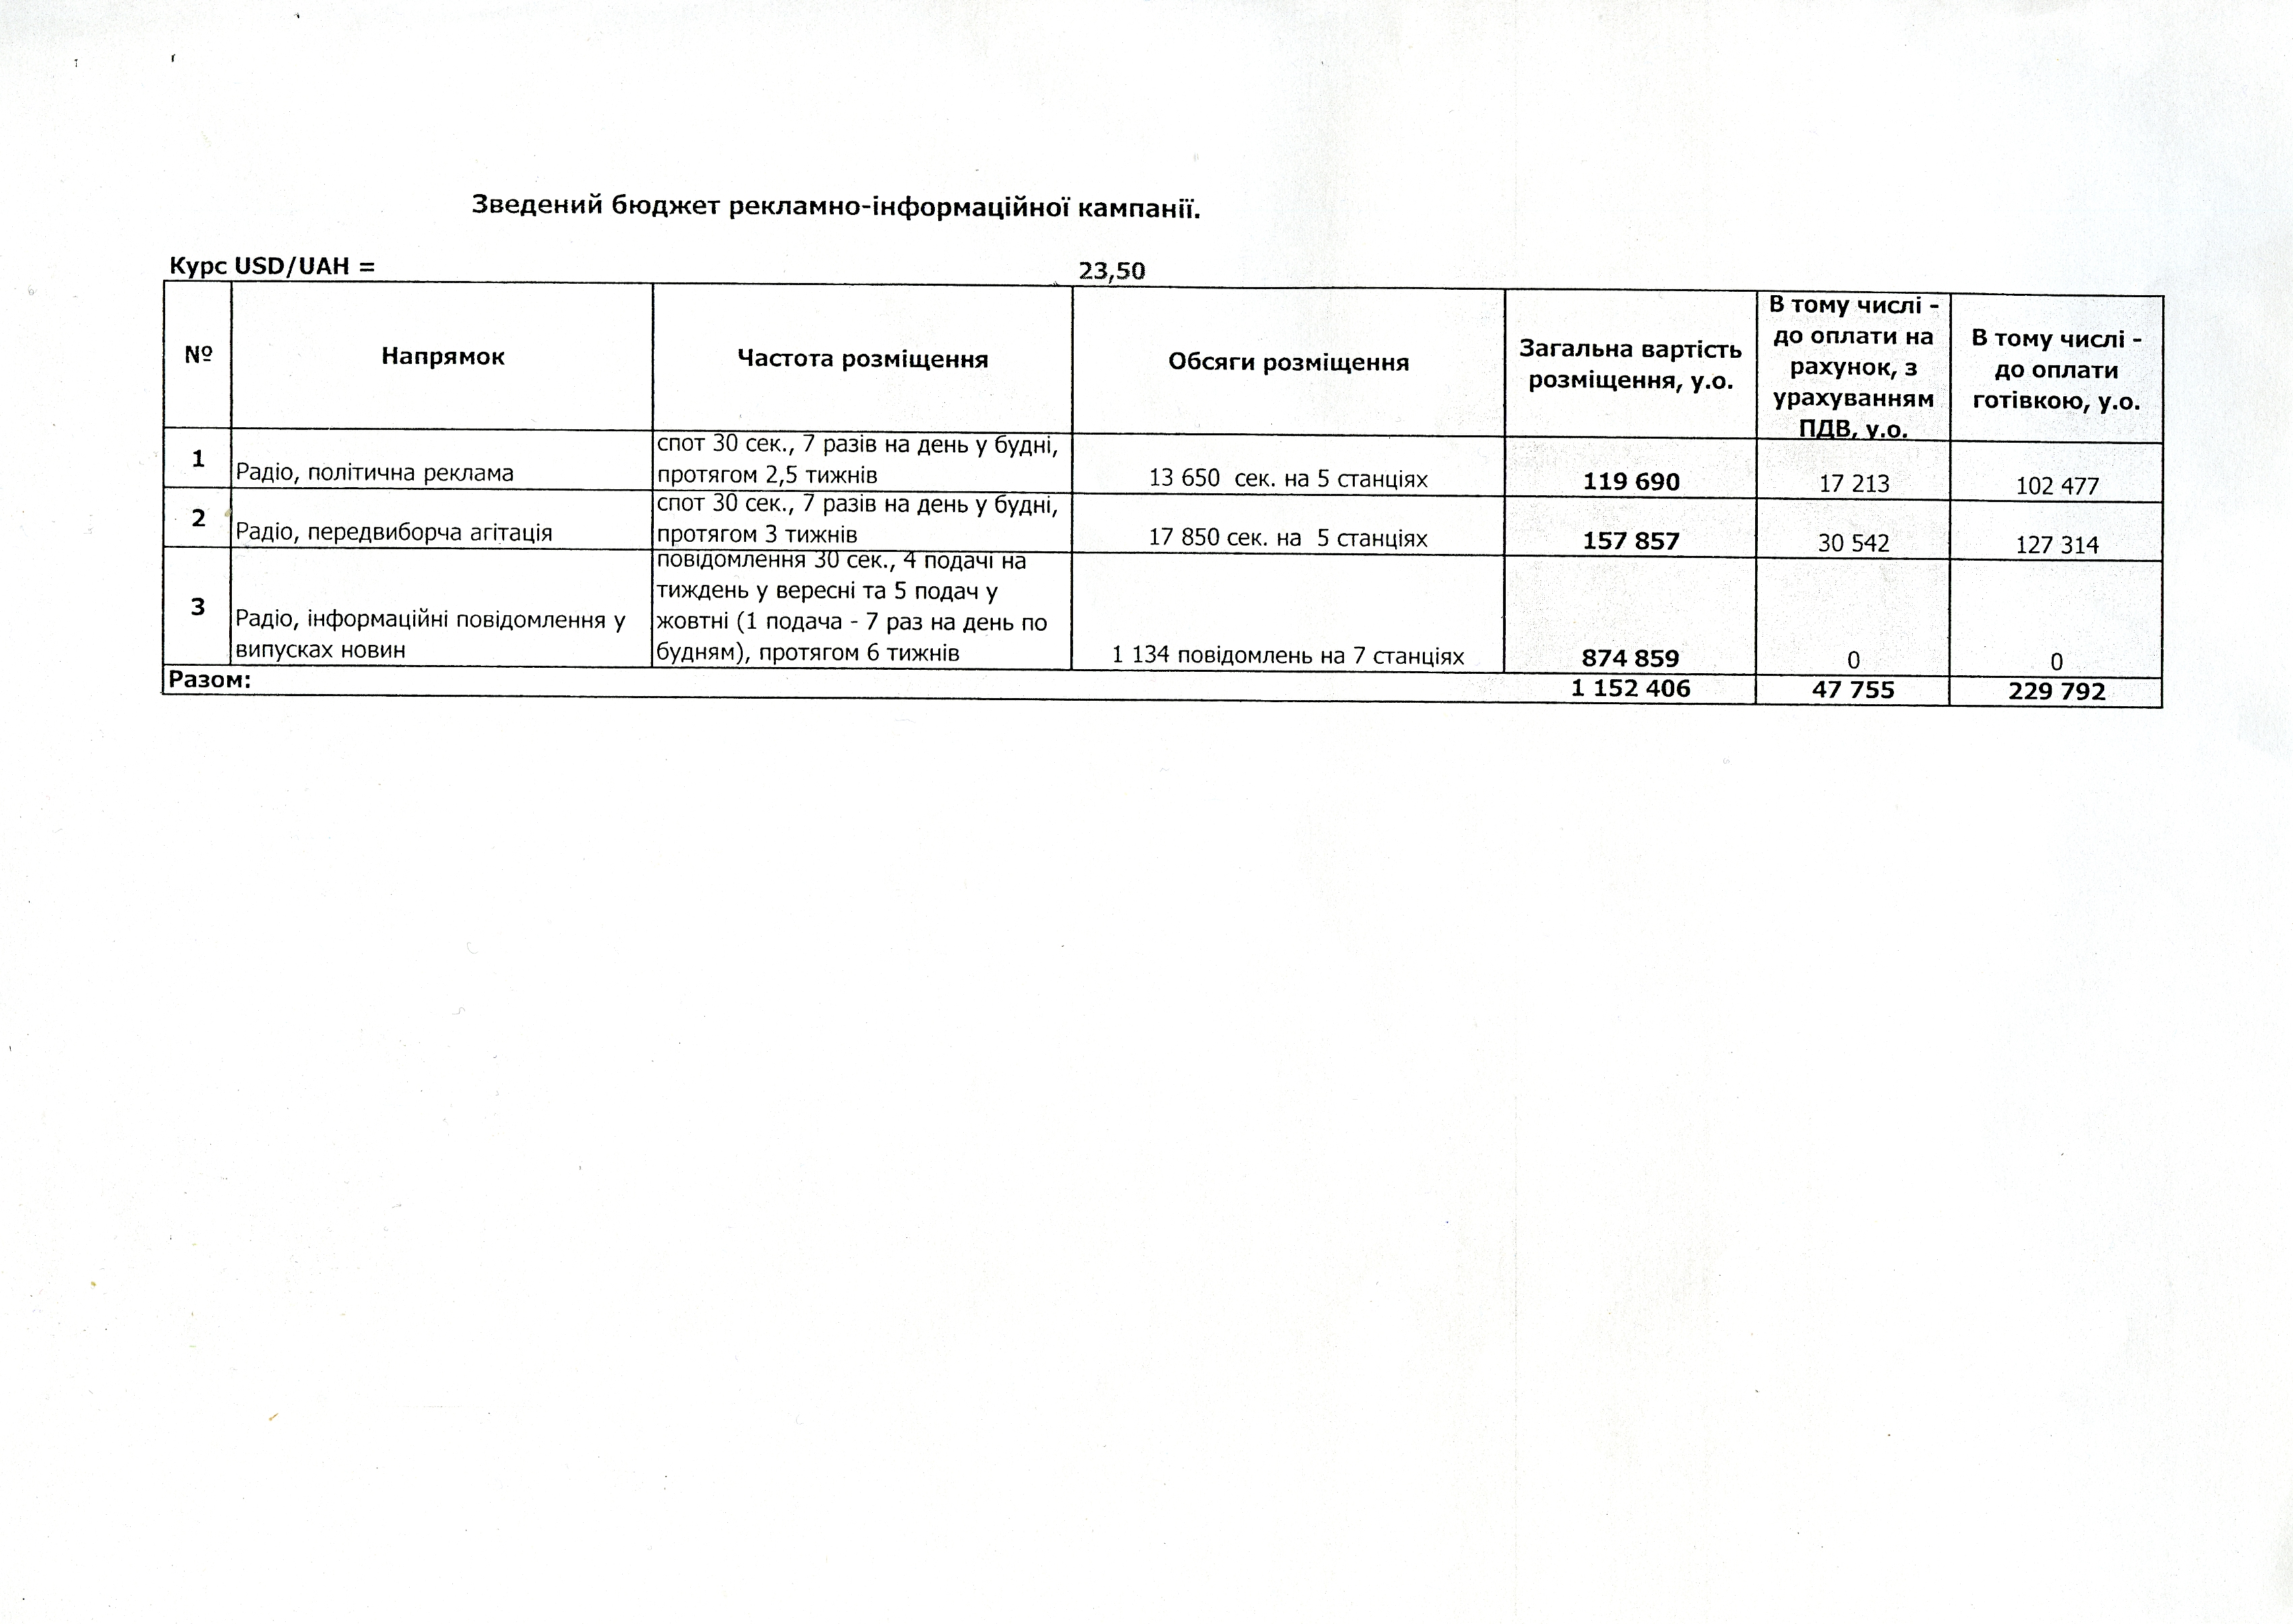 This document, obtained by the Kyiv Post, alleges that the presidential administration paid $119,690 for political ads on radio, $157,857 for election commercials and $874,859 for mentions masked as regular news. The second column indicates that only a fraction of the sum was paid cashless, with taxes included, while most (the third column) was paid in cash, off-the-books. 